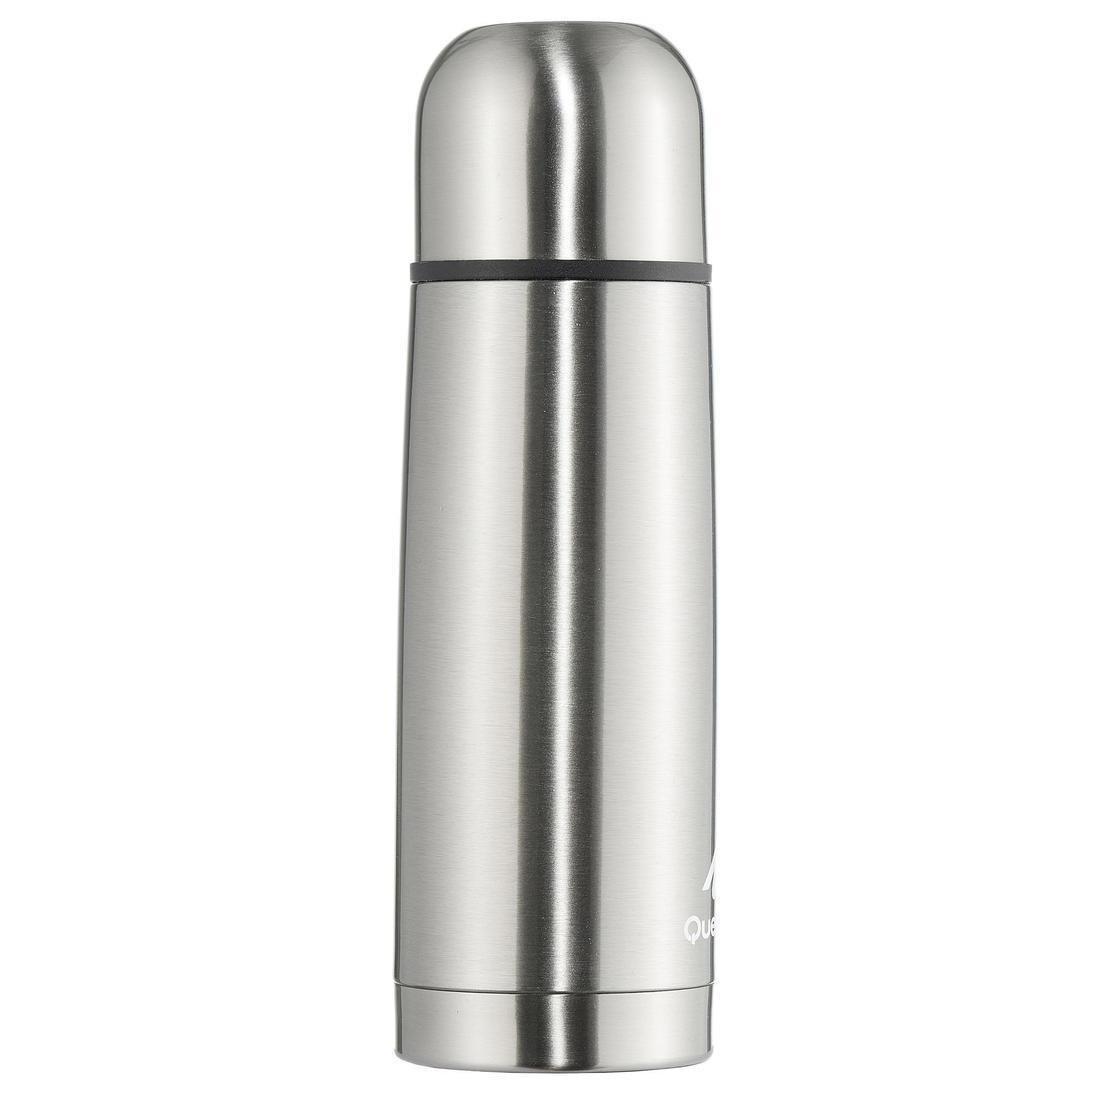 QUECHUA - Stainless Steel Isothermal Bottle - 0.4L, Blue